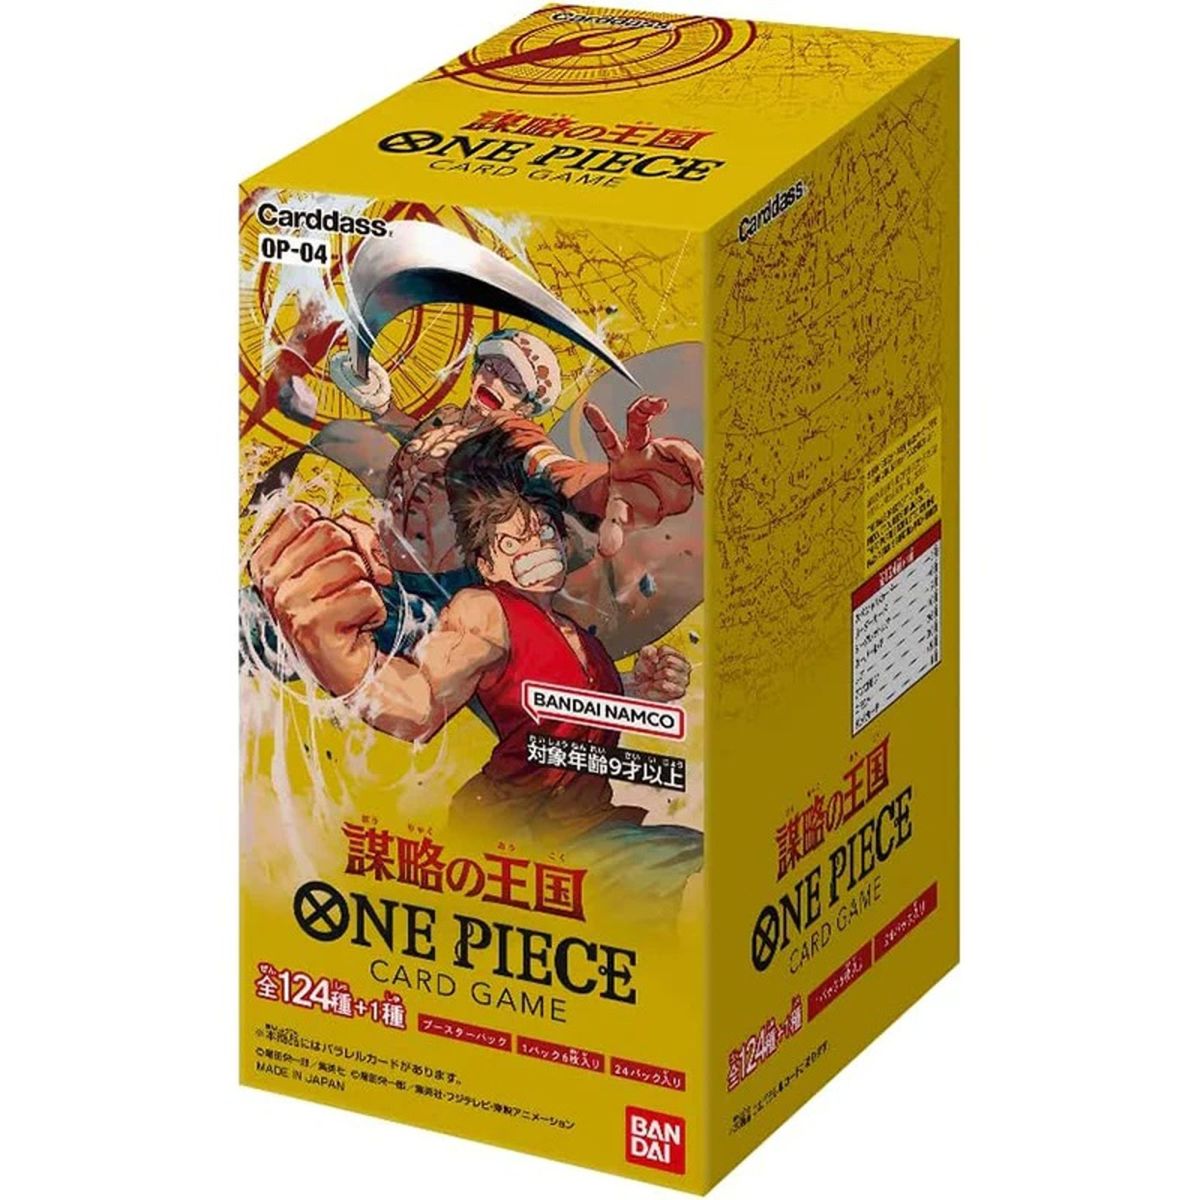 Item One Piece CG - Display - Box of 24 Boosters - Kingdom of Intrigue - OP-04 - JP